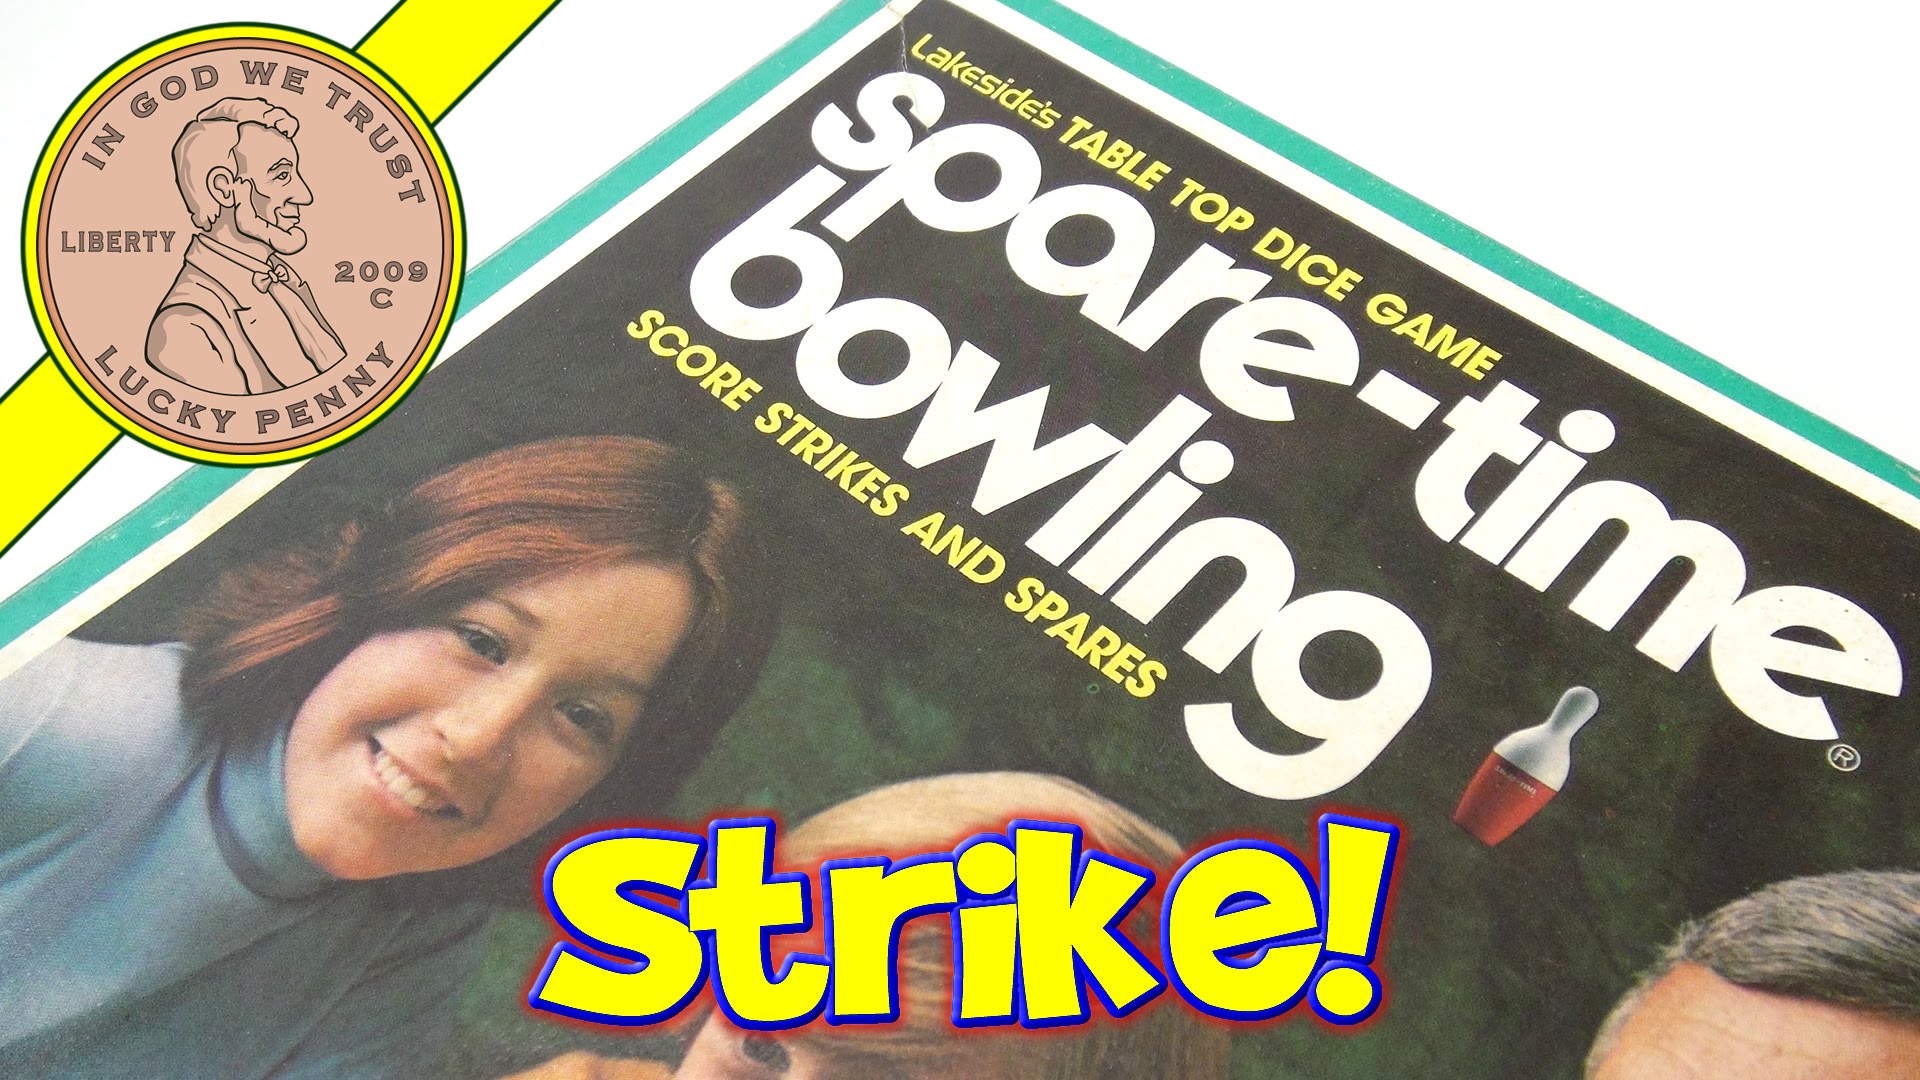 Spare Time Bowling Dice Game by Lakeside 1977 #8340 - Strike! - YouTube